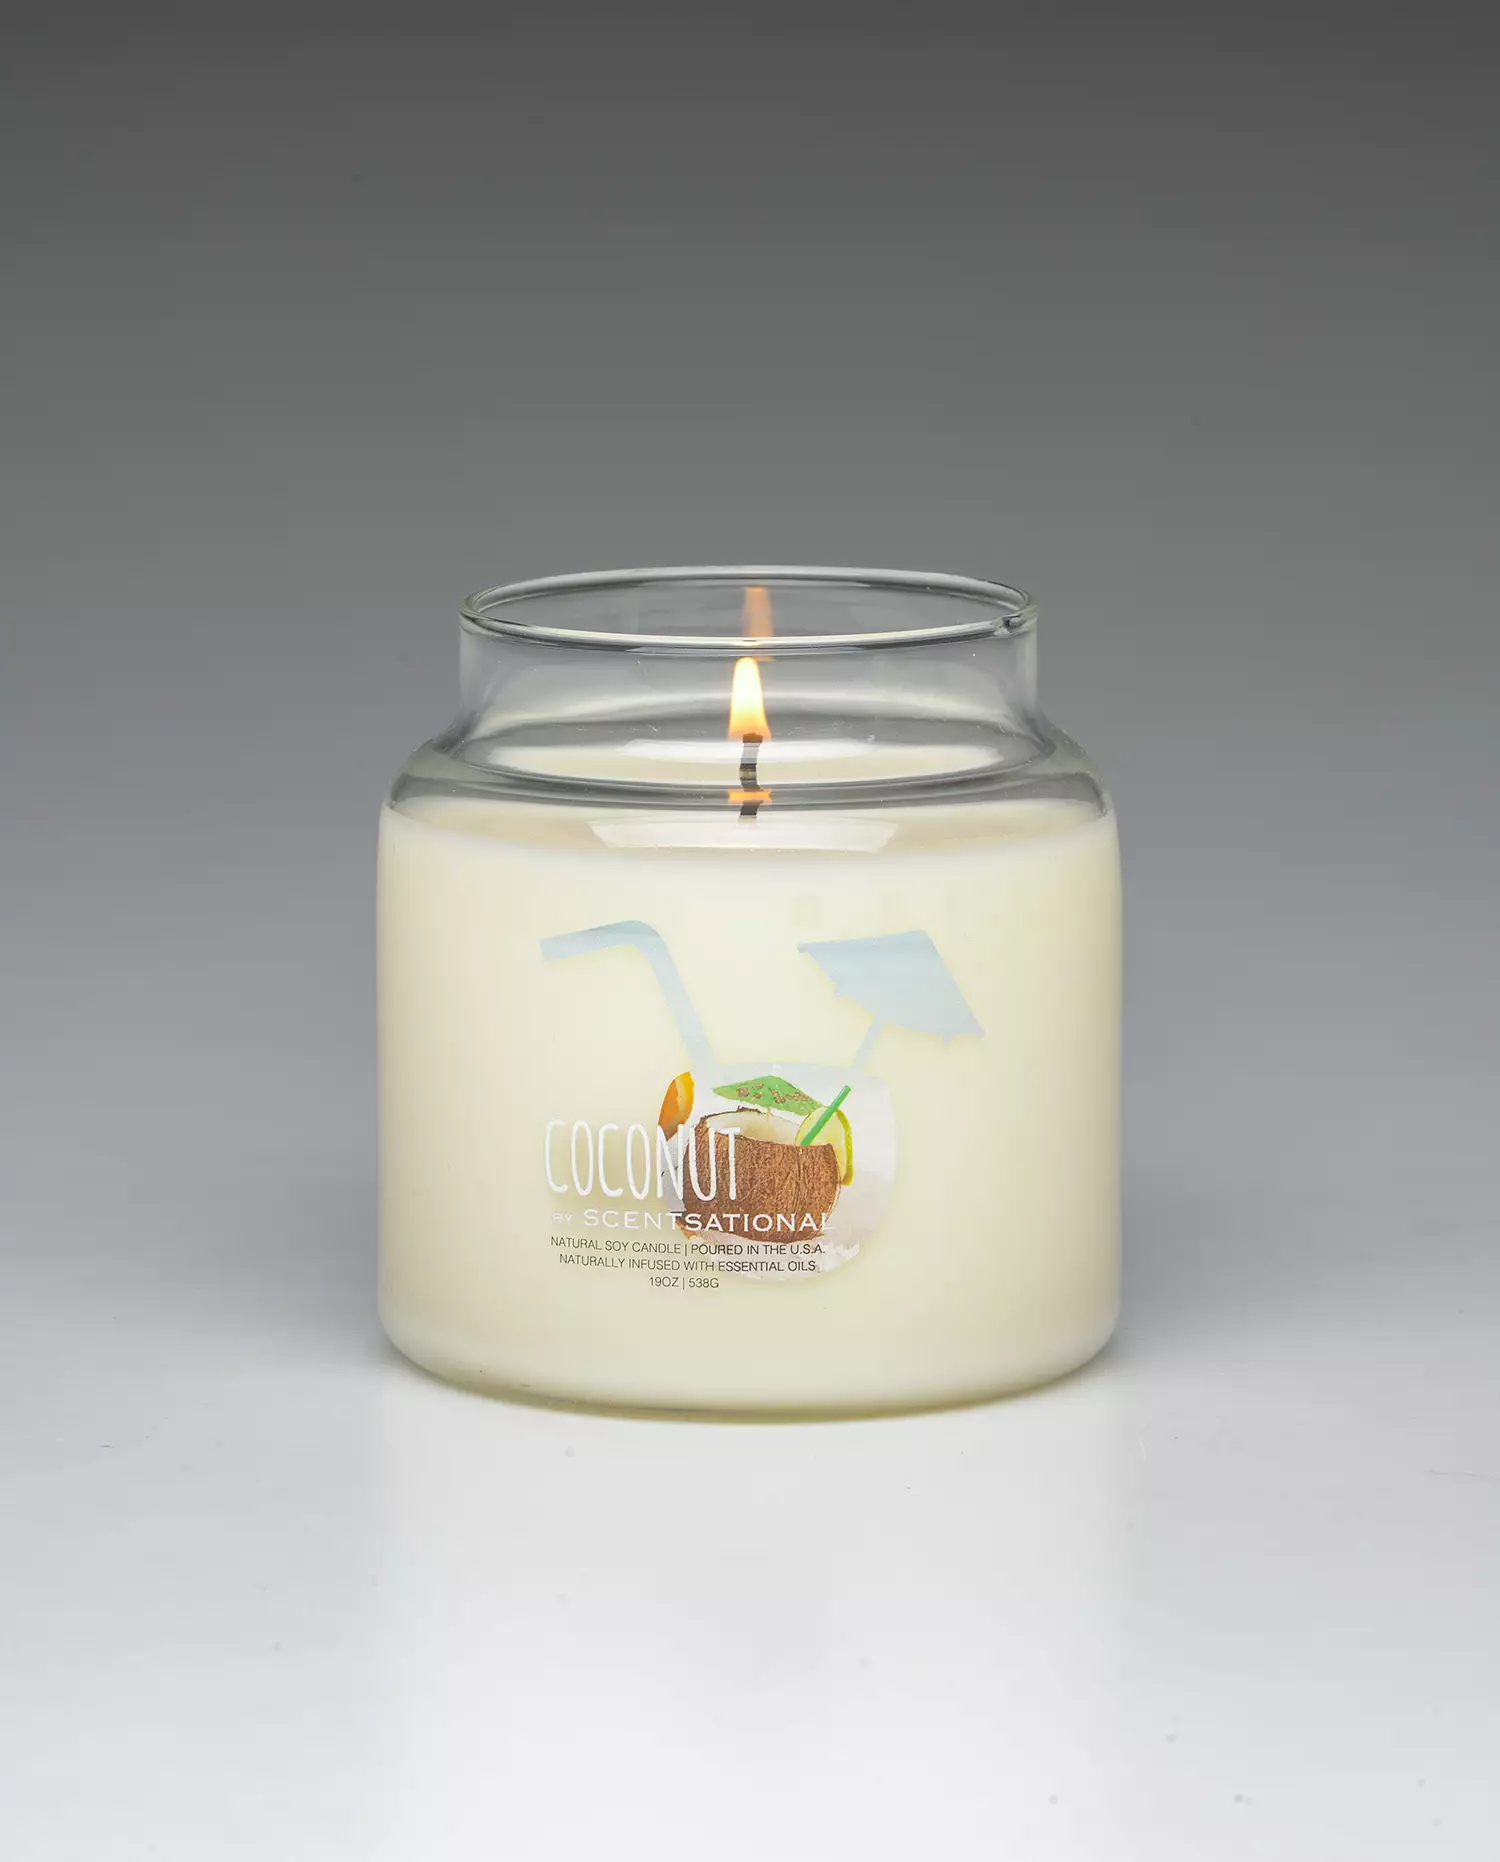 Coconut – 19oz scented candle burning